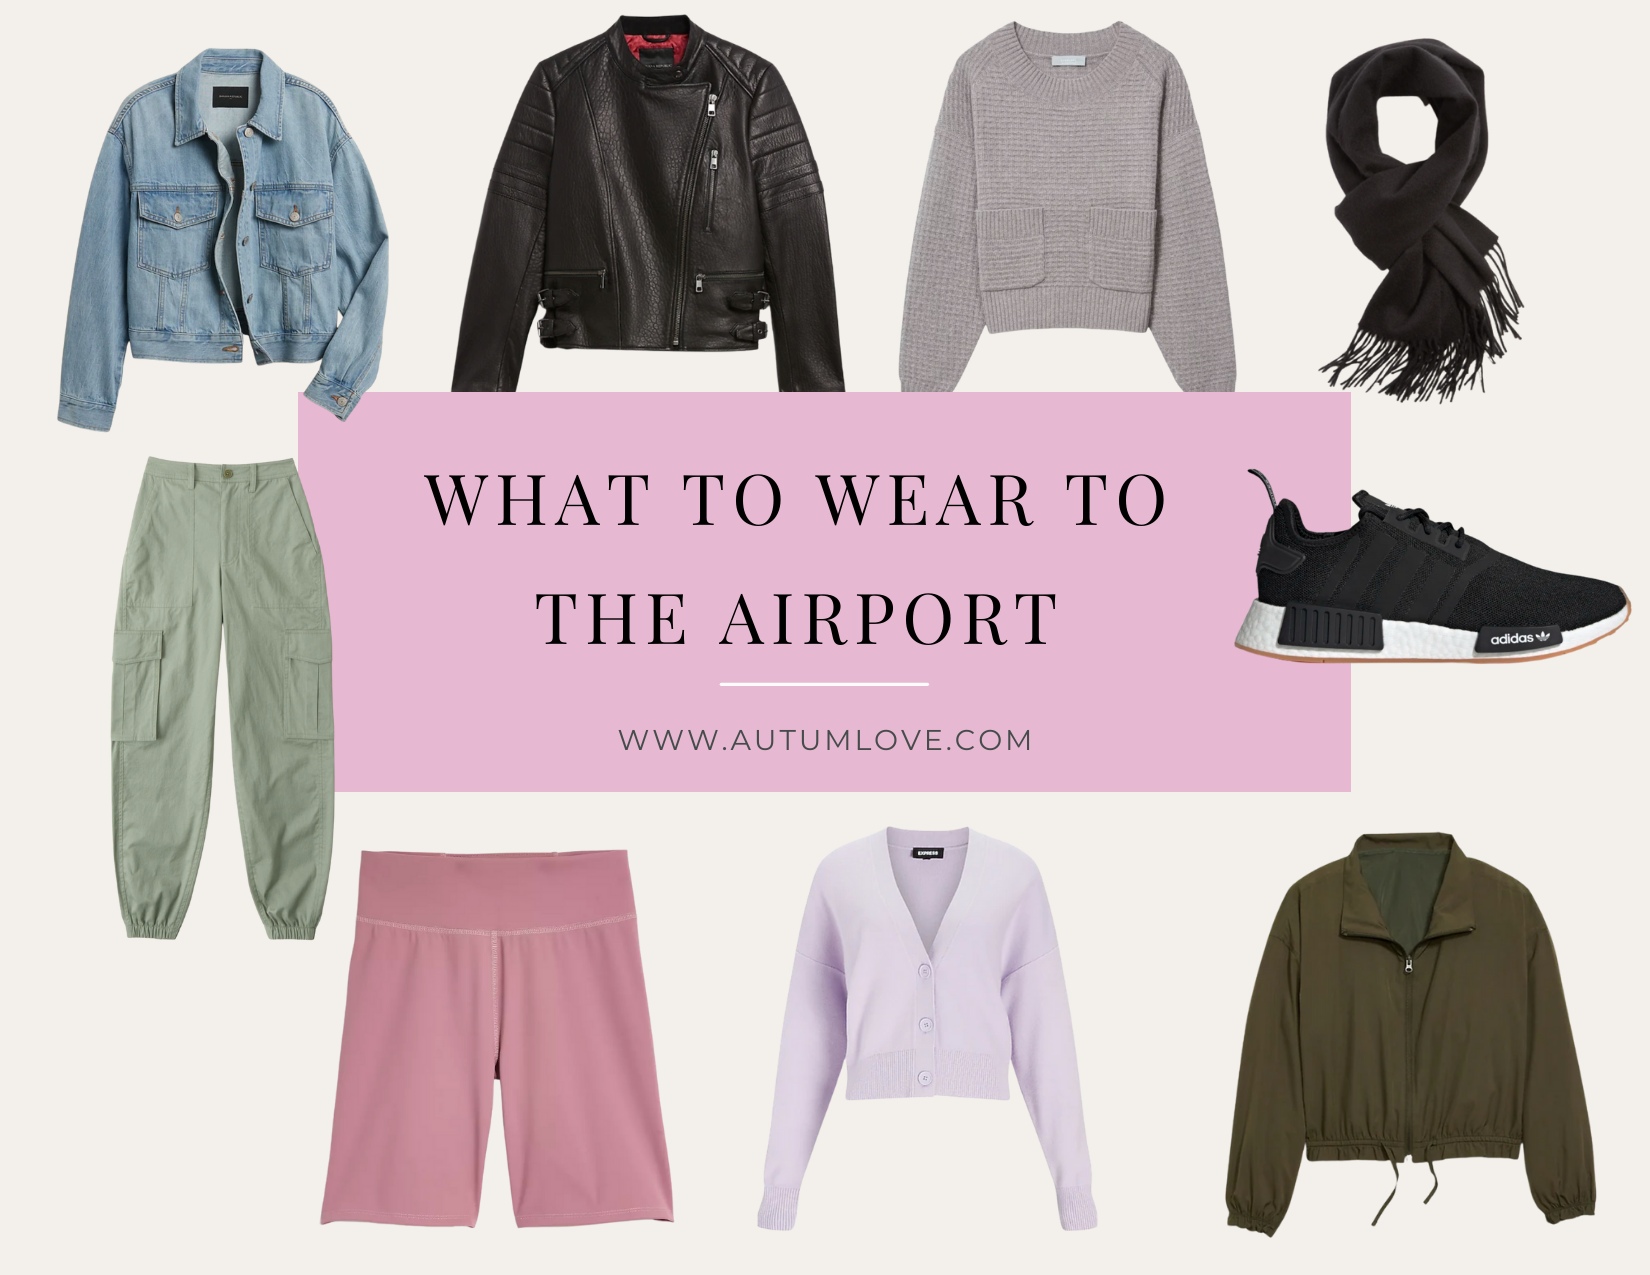 What To Wear To The Airport The Ultimate Guide To Airport Style — Autum Love